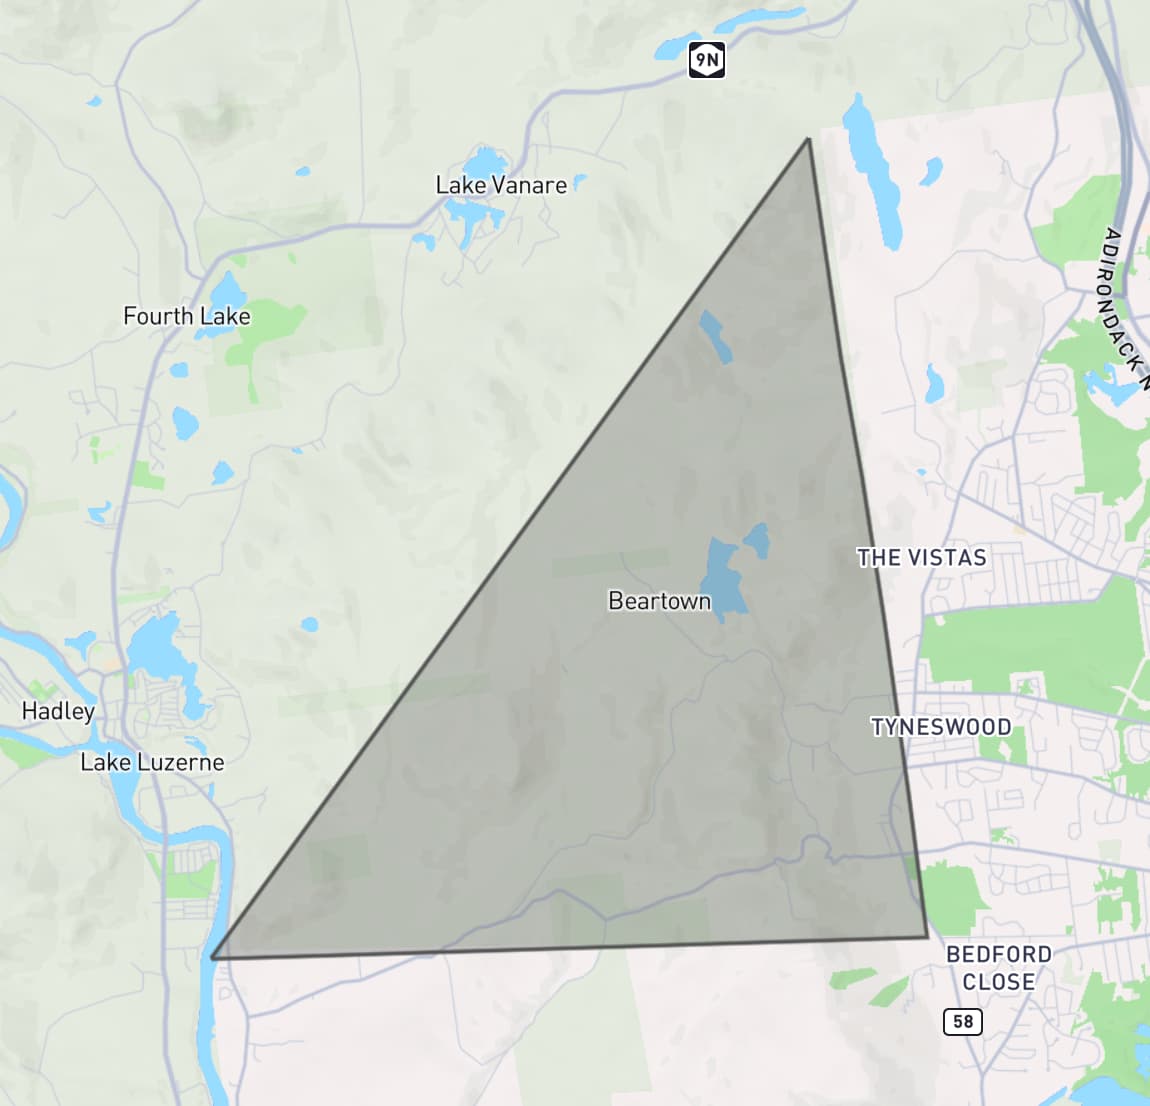 geojson.io screenshot - a triangle shape sits on top of an area of upstate New York, clearly not in the shape of the park